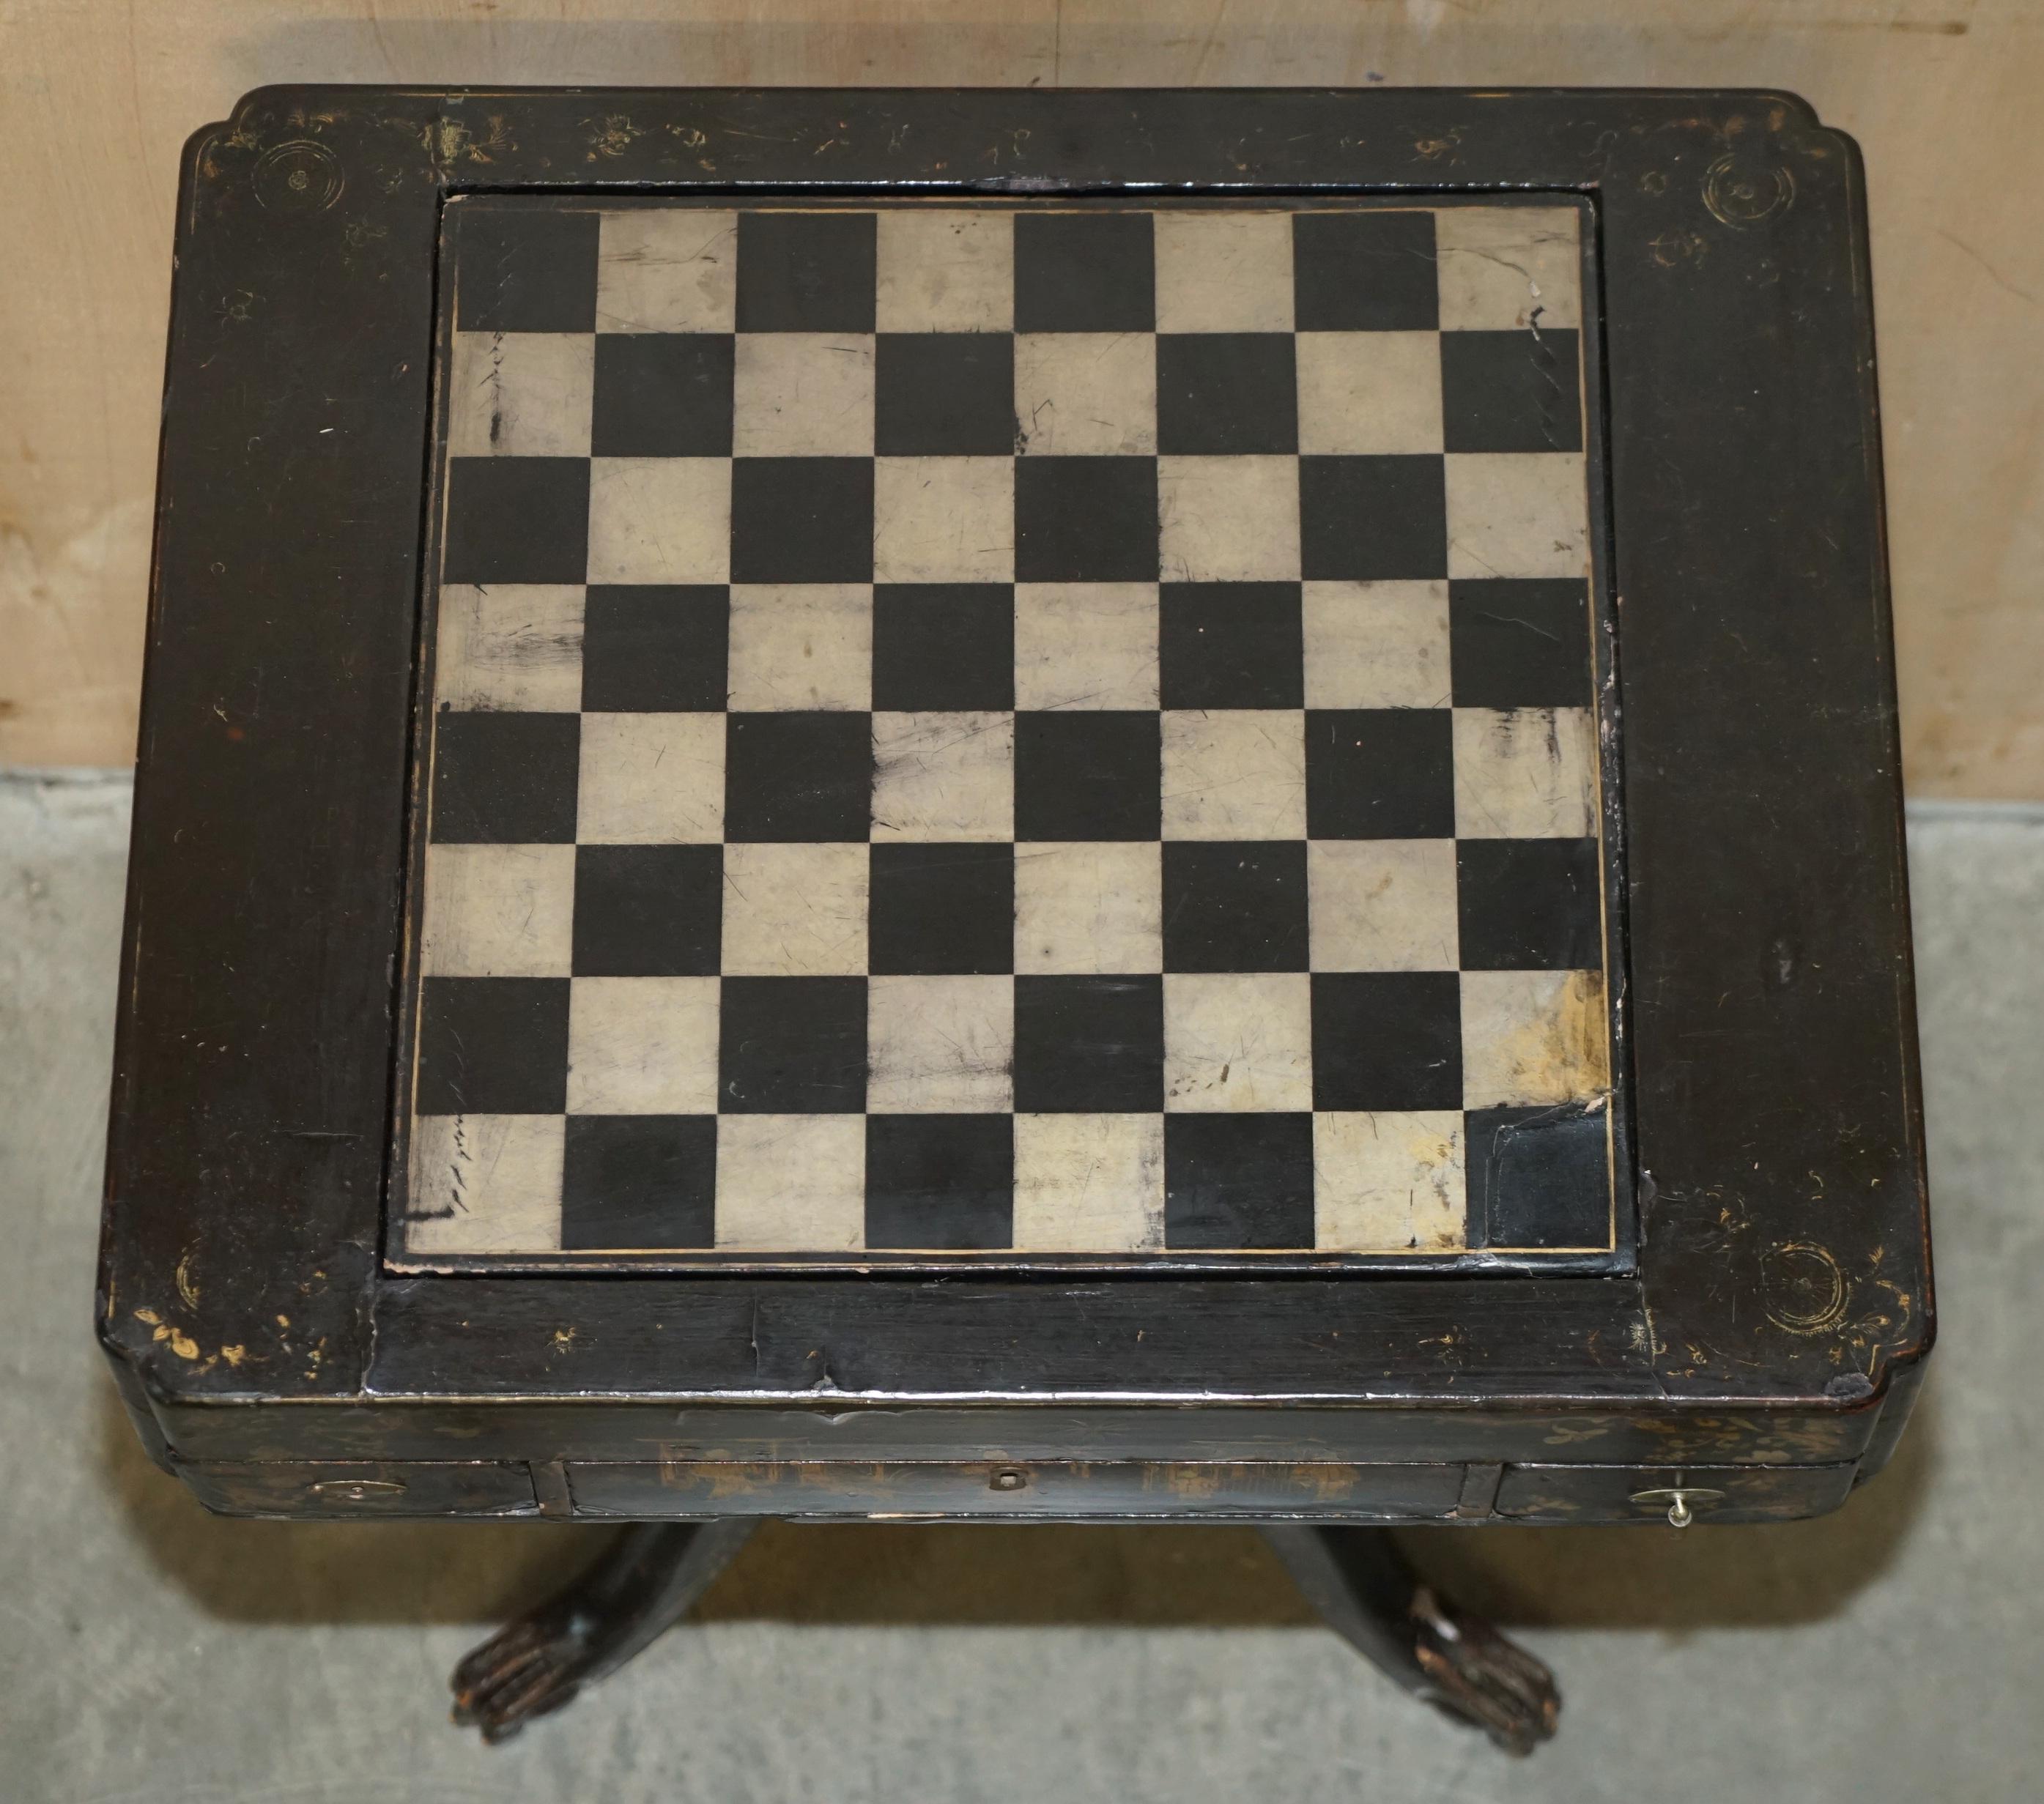 ANTIQUE GEORGIAN CIRCA 1820 CHiNESE CHINOISERIE CHESSBOARD BACKGAMMON TABLE For Sale 5